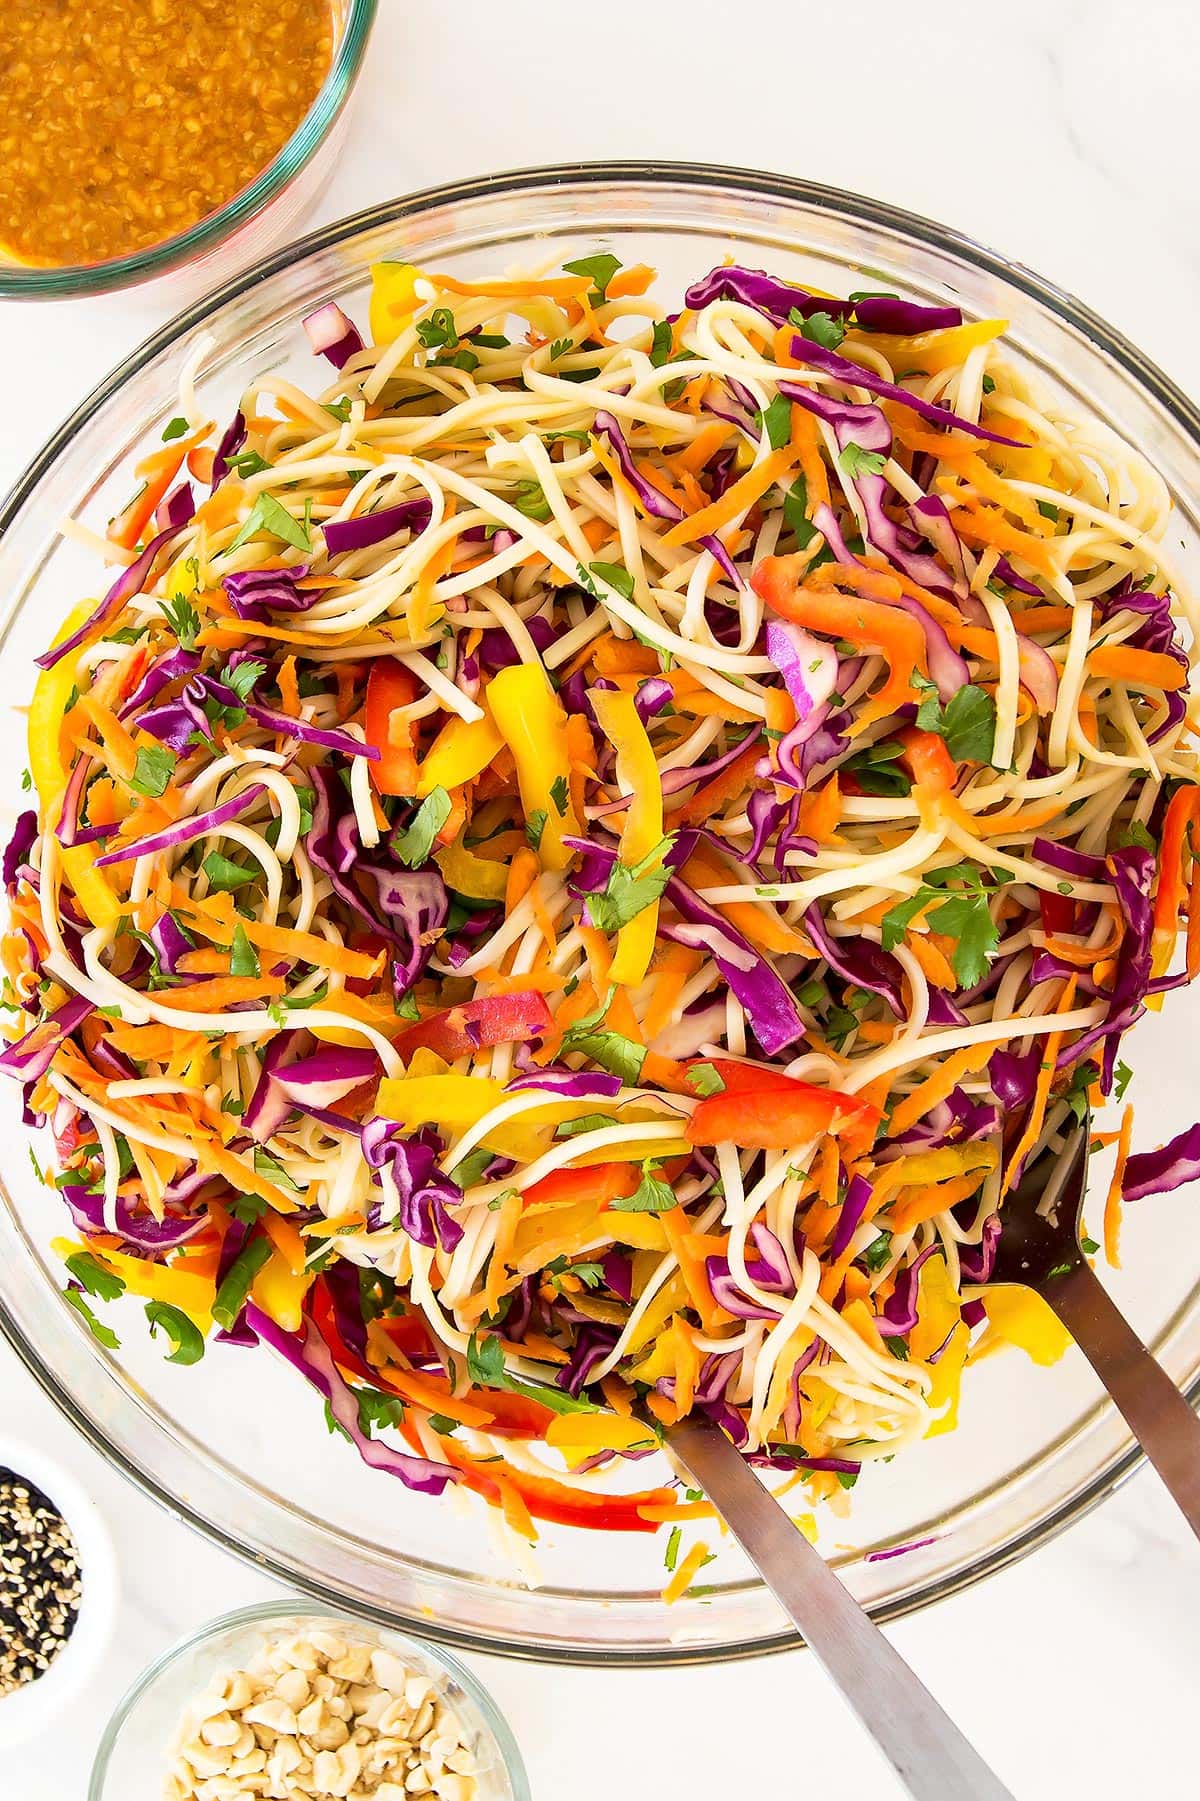 Tossed veggie noodles salad in bowl with serving tongs